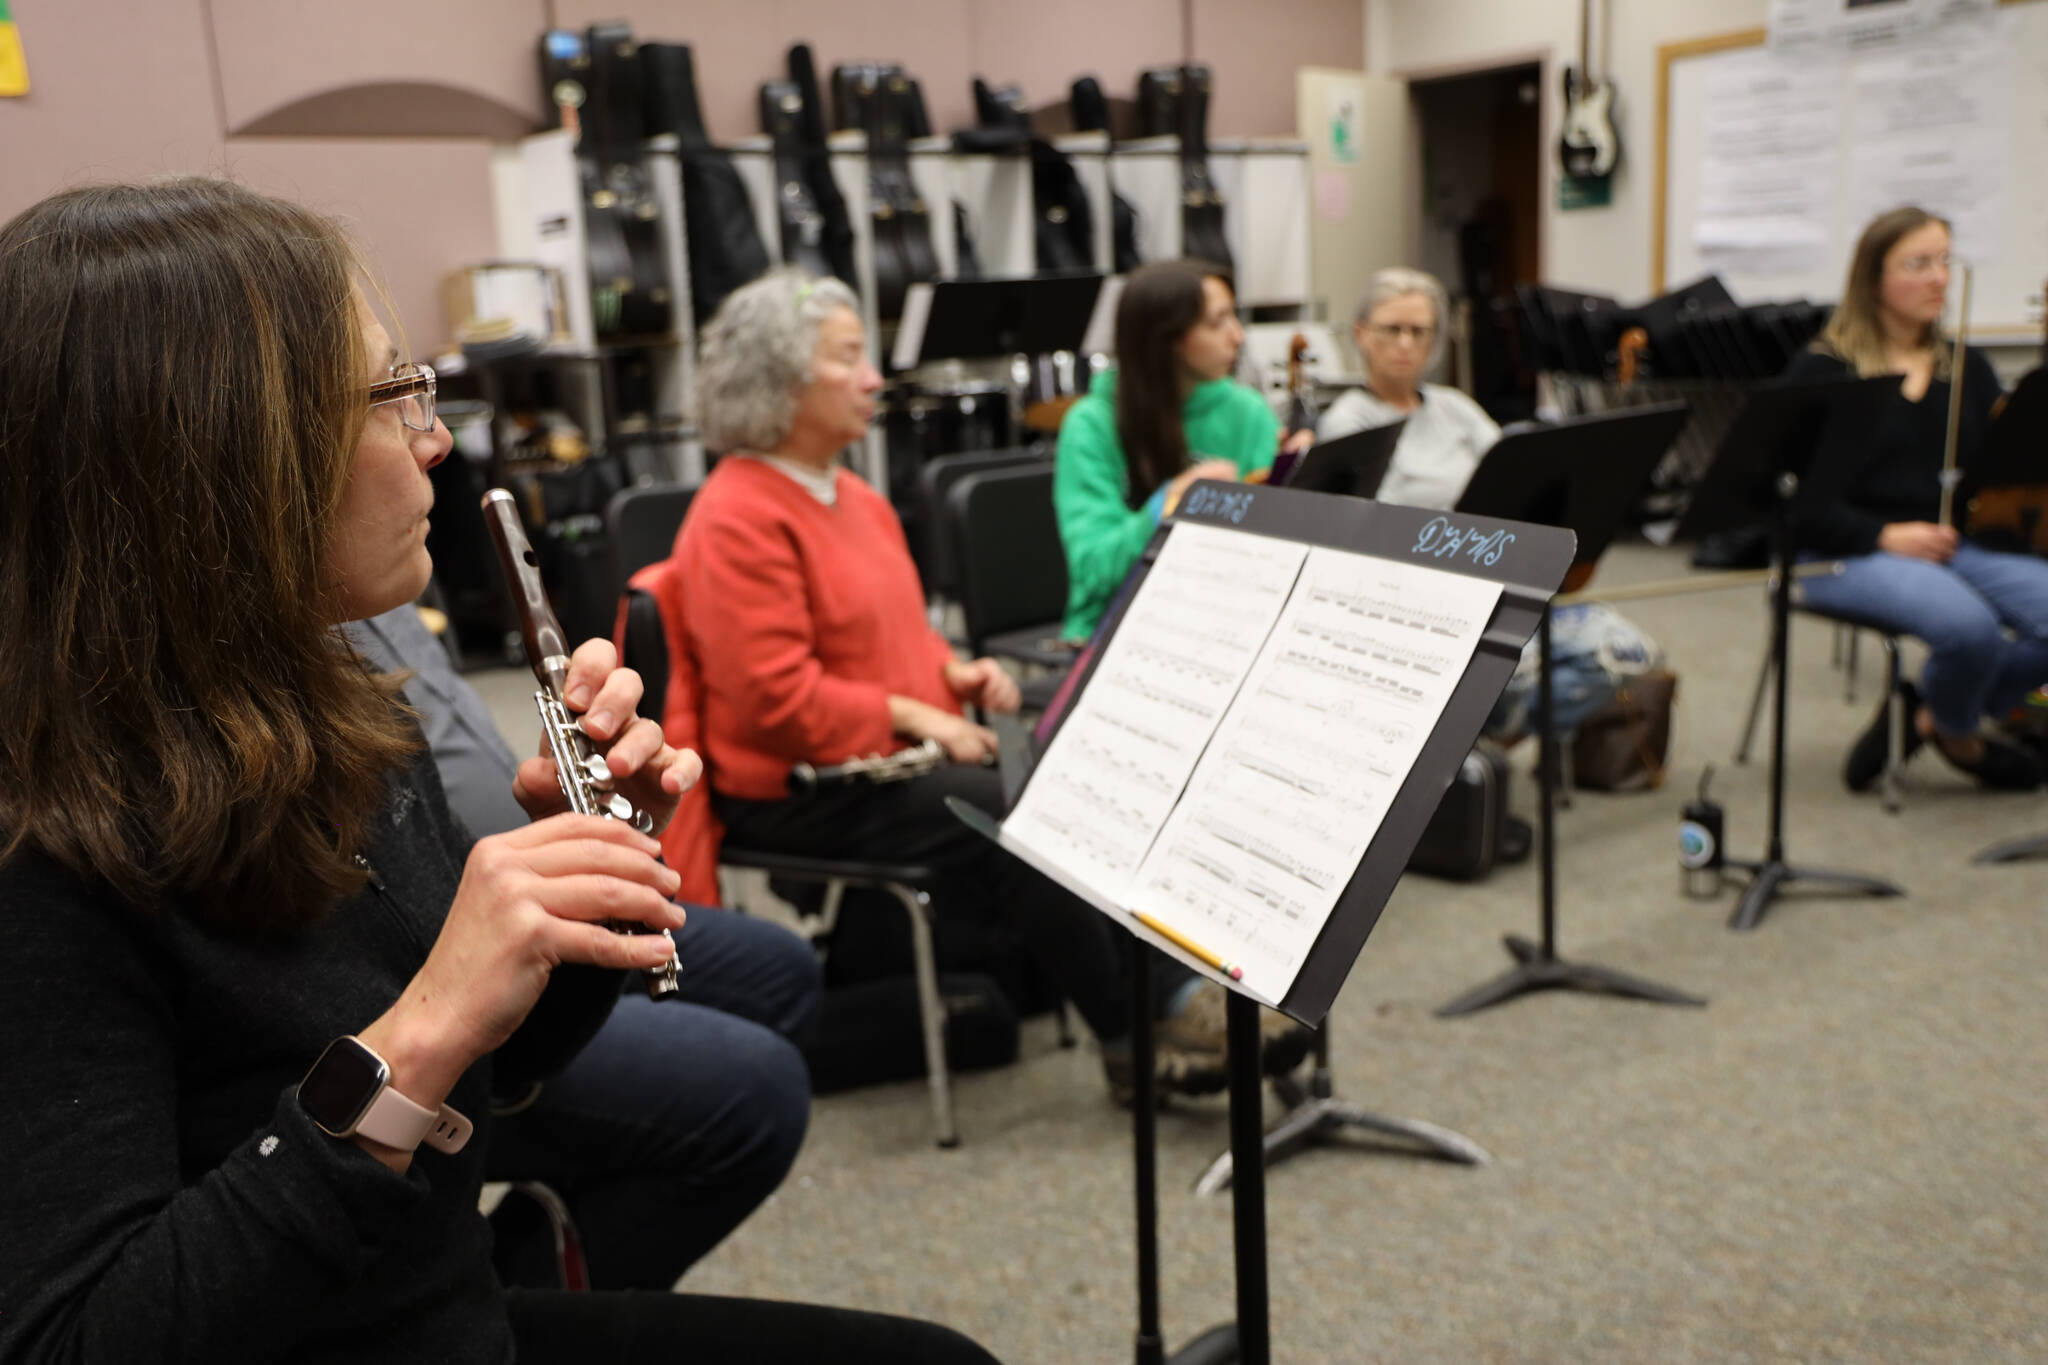 Clarise Larson / Juneau Empire 
Sally Schlichting holds her piccolo mid-song during Con Brio Chamber Series’ Tuesday evening rehearsal. She was joined by Jetta Whittaker on oboe, Eleni Levi, Lisa Ibias and Lindsay Clark on violins.